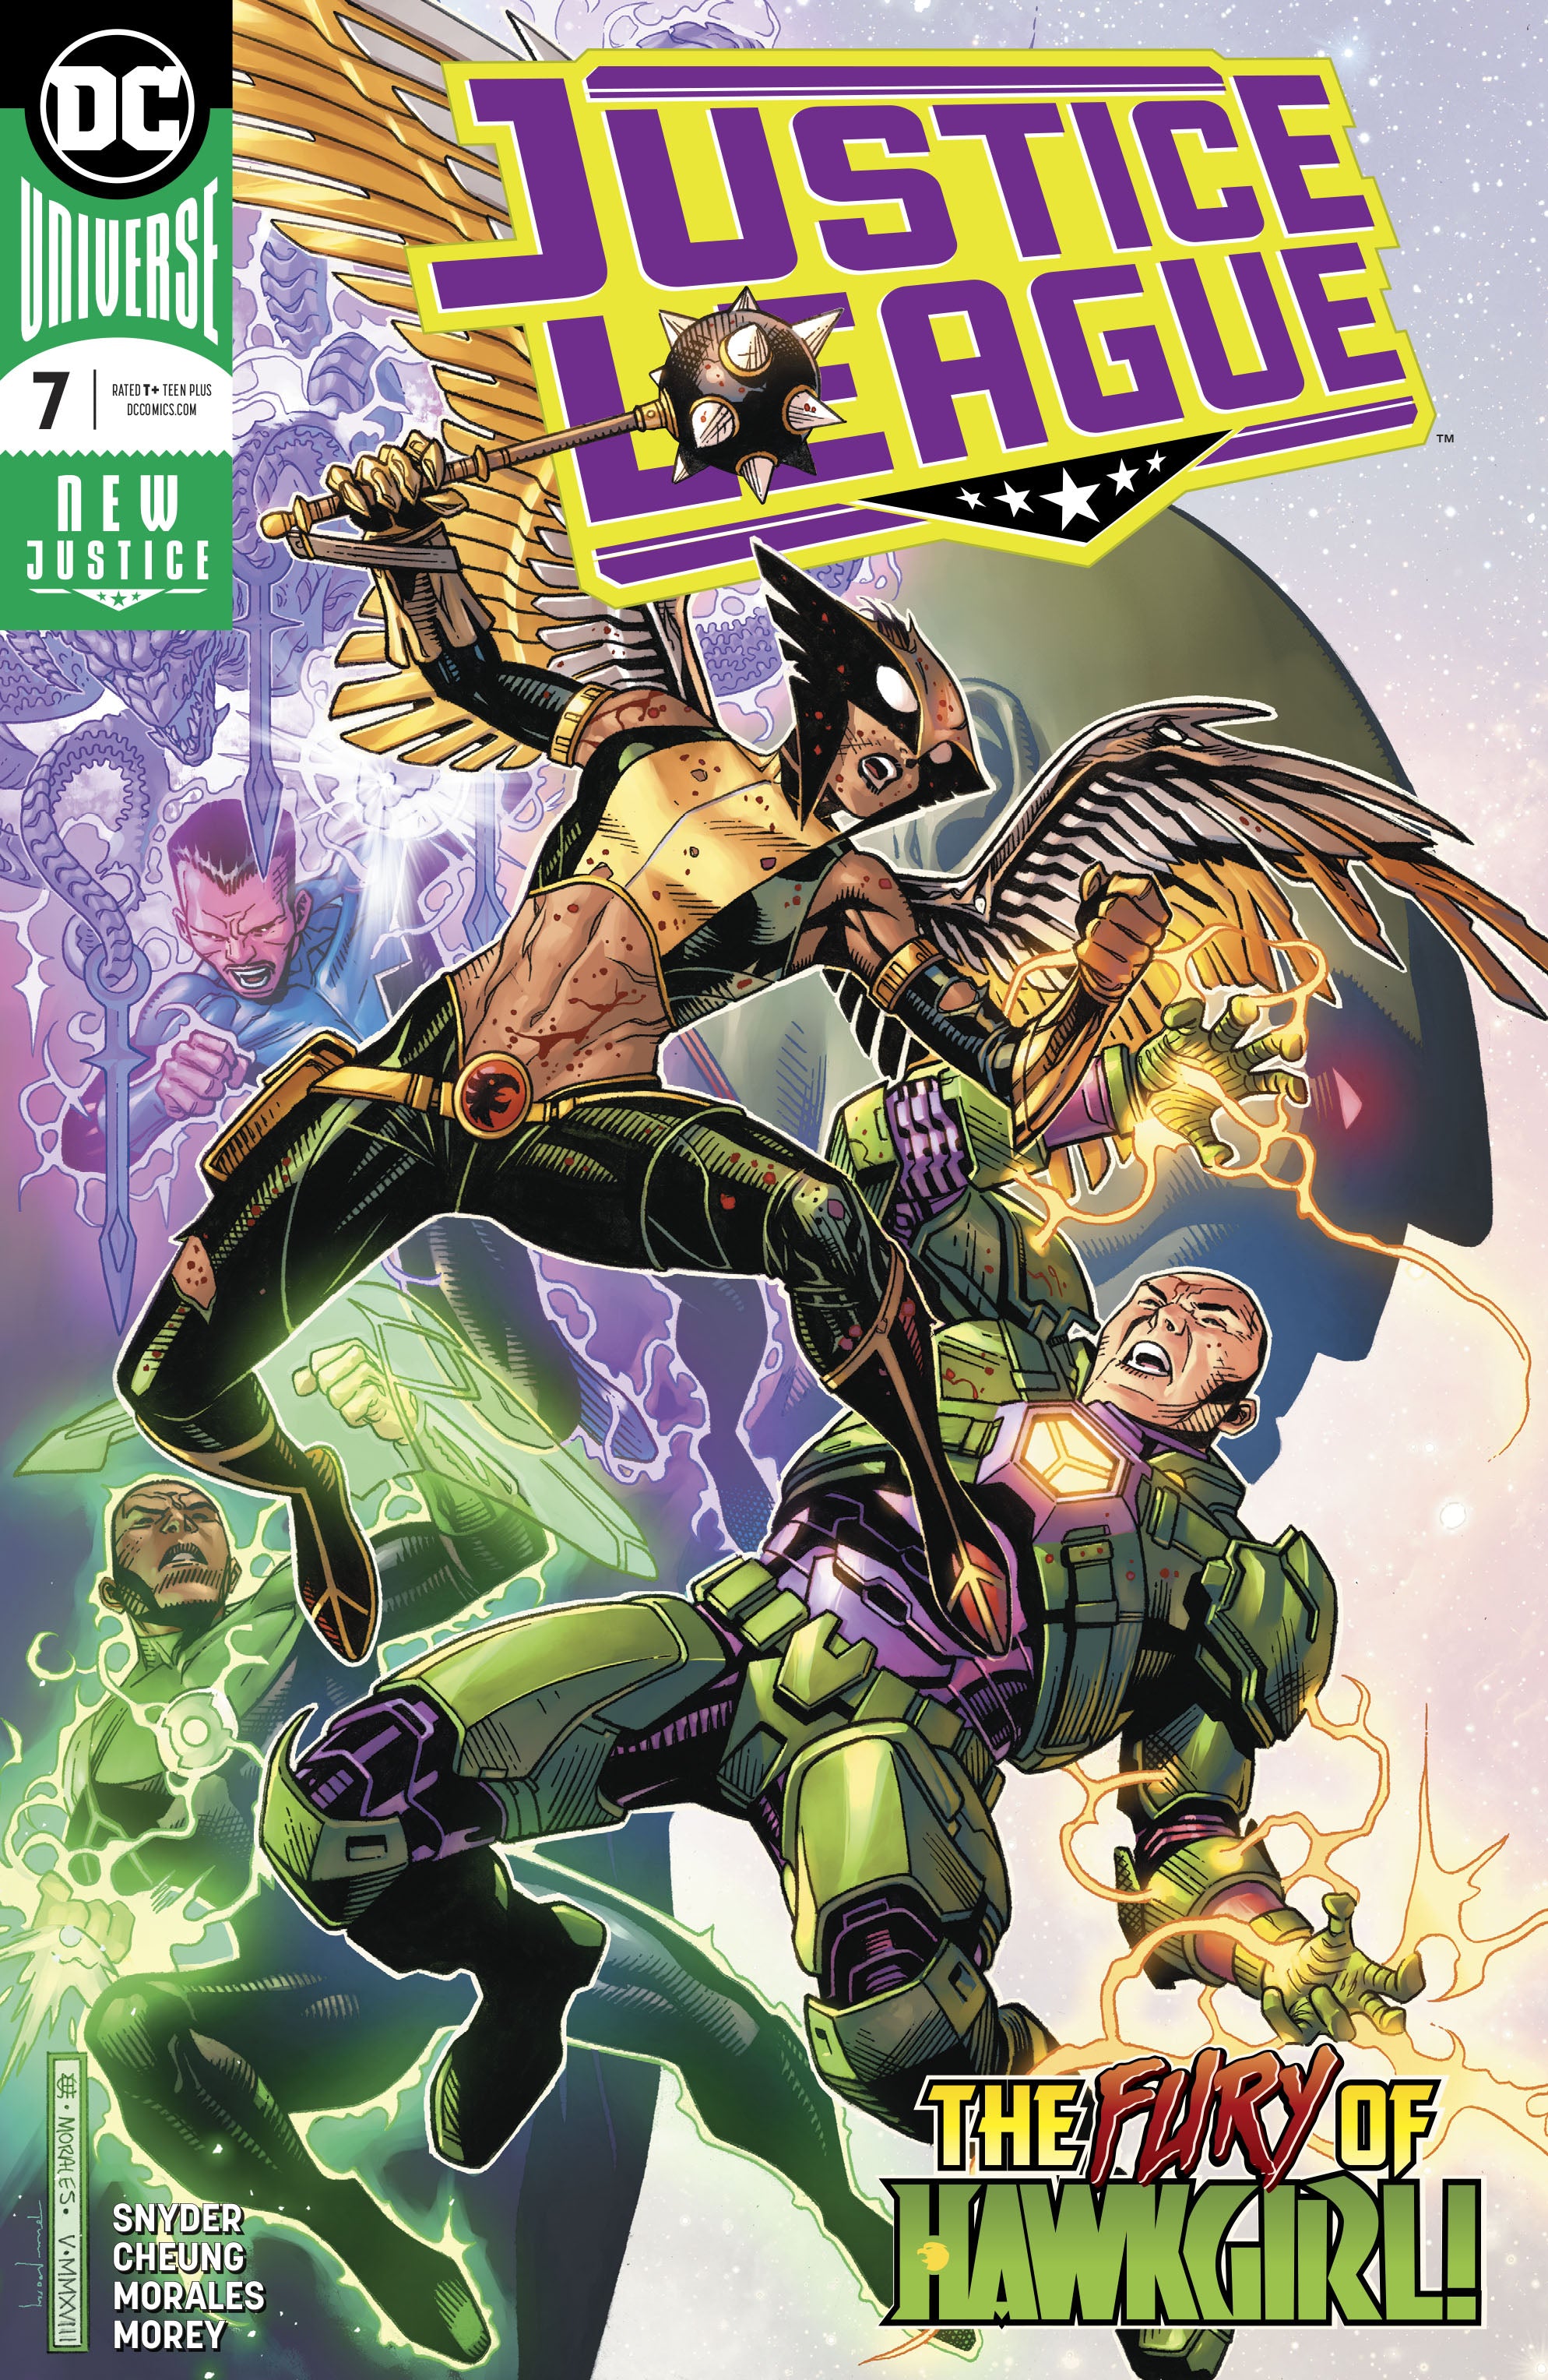 JUSTICE LEAGUE #7 | Game Master's Emporium (The New GME)